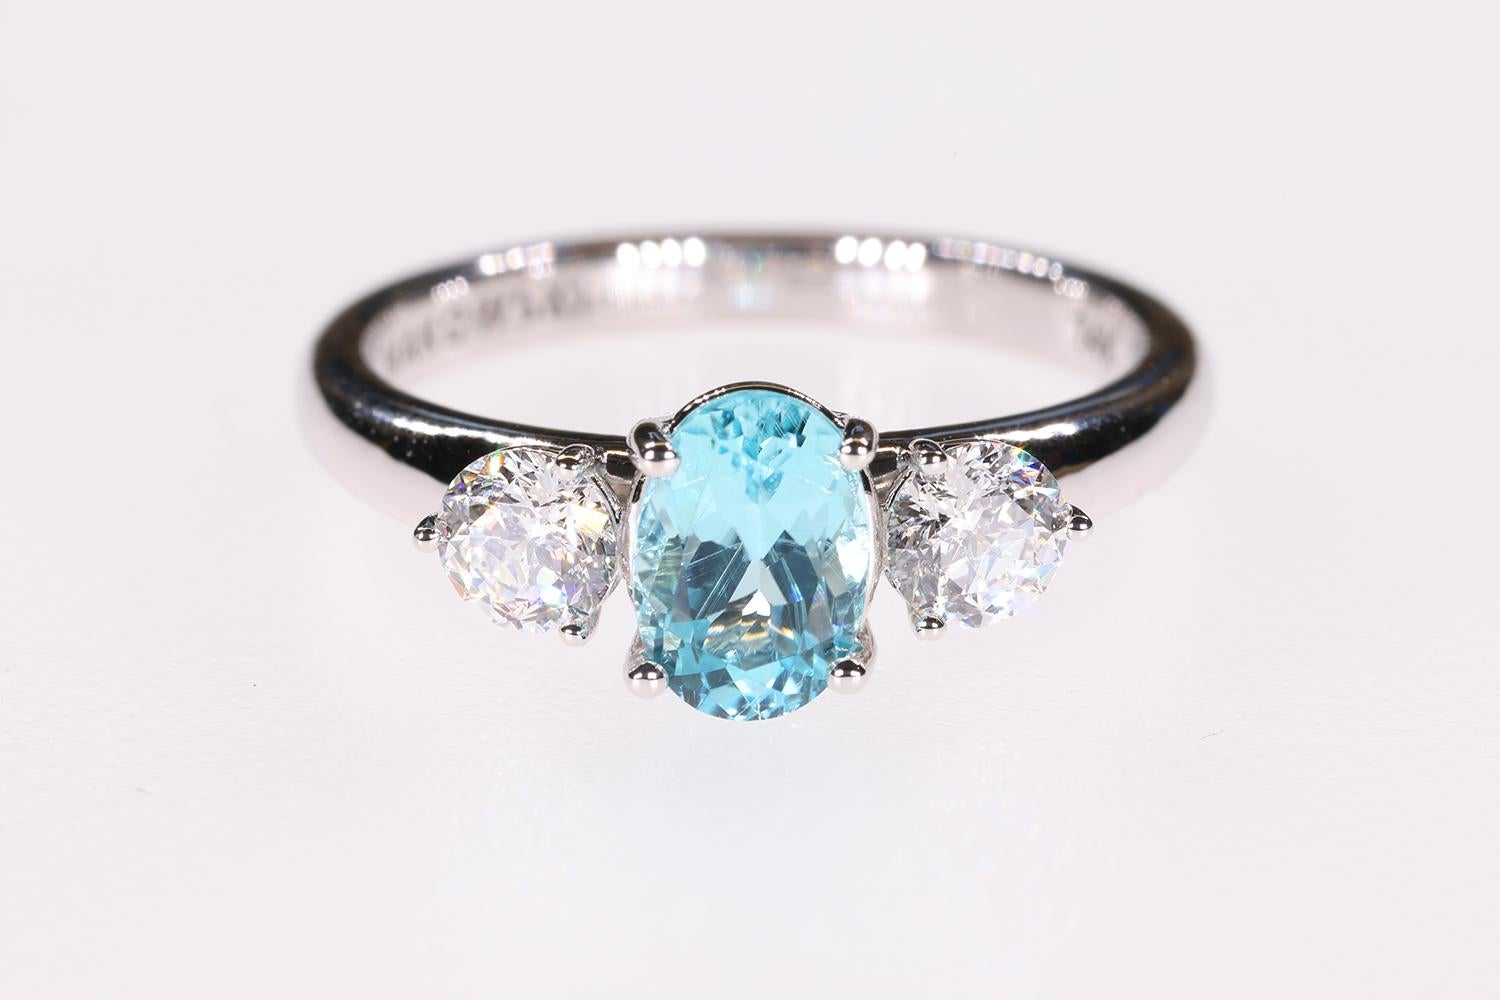 This is a beautiful Blue 1.19 Carat Paraiba Blue 3 Stone engagement ring that features two 88 faceted Sirius Star accent diamonds. The design is sleek and modern and cast in 14K white gold with a Bright Rhodium plating for extra brilliance and